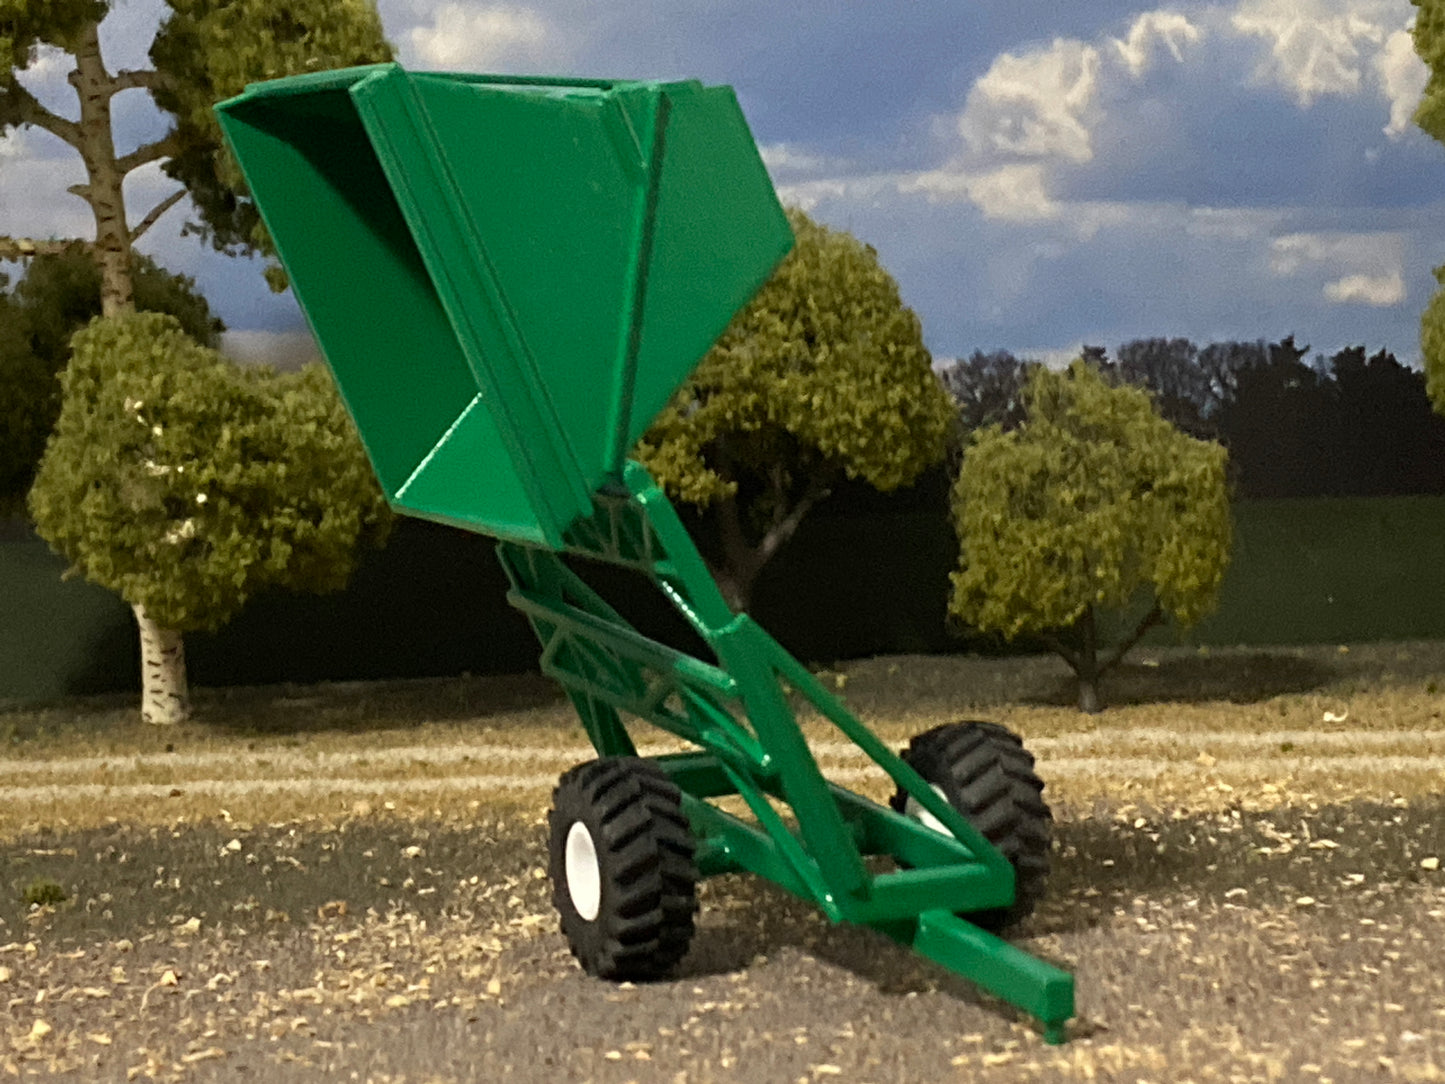 1/64 Dump Cart with Extensions Green